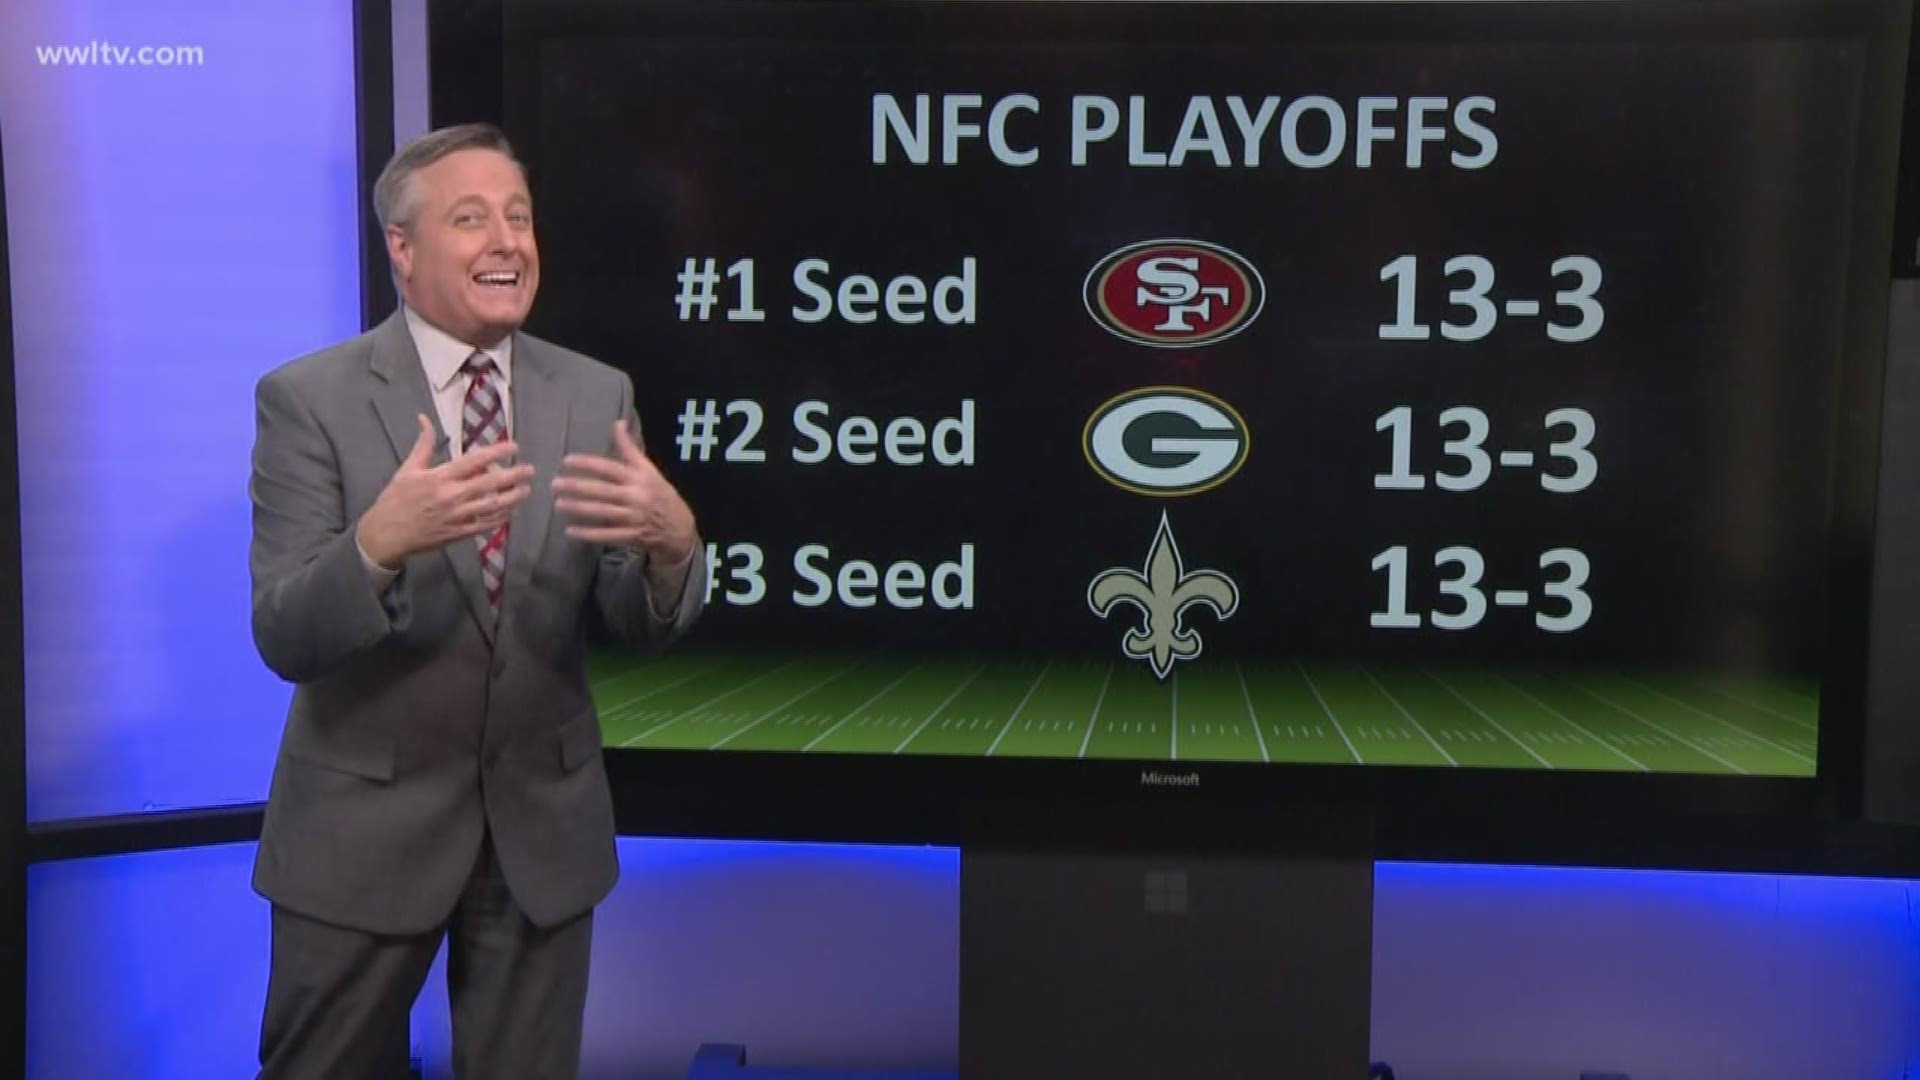 No first-round playoff bye but Saints could host NFC championship